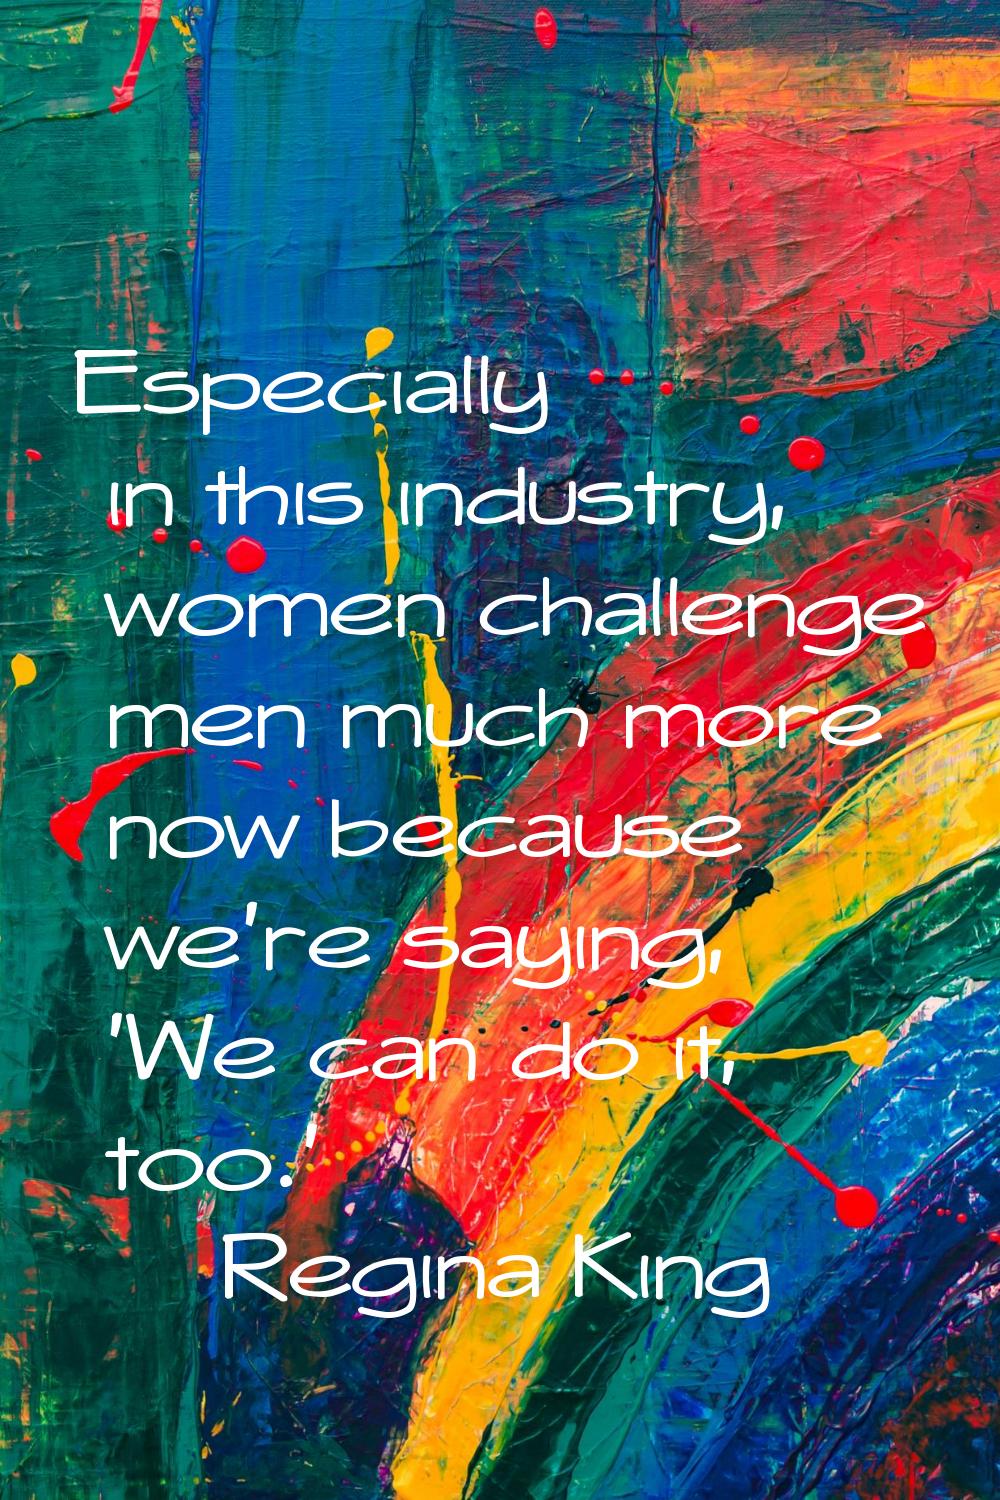 Especially in this industry, women challenge men much more now because we're saying, 'We can do it,